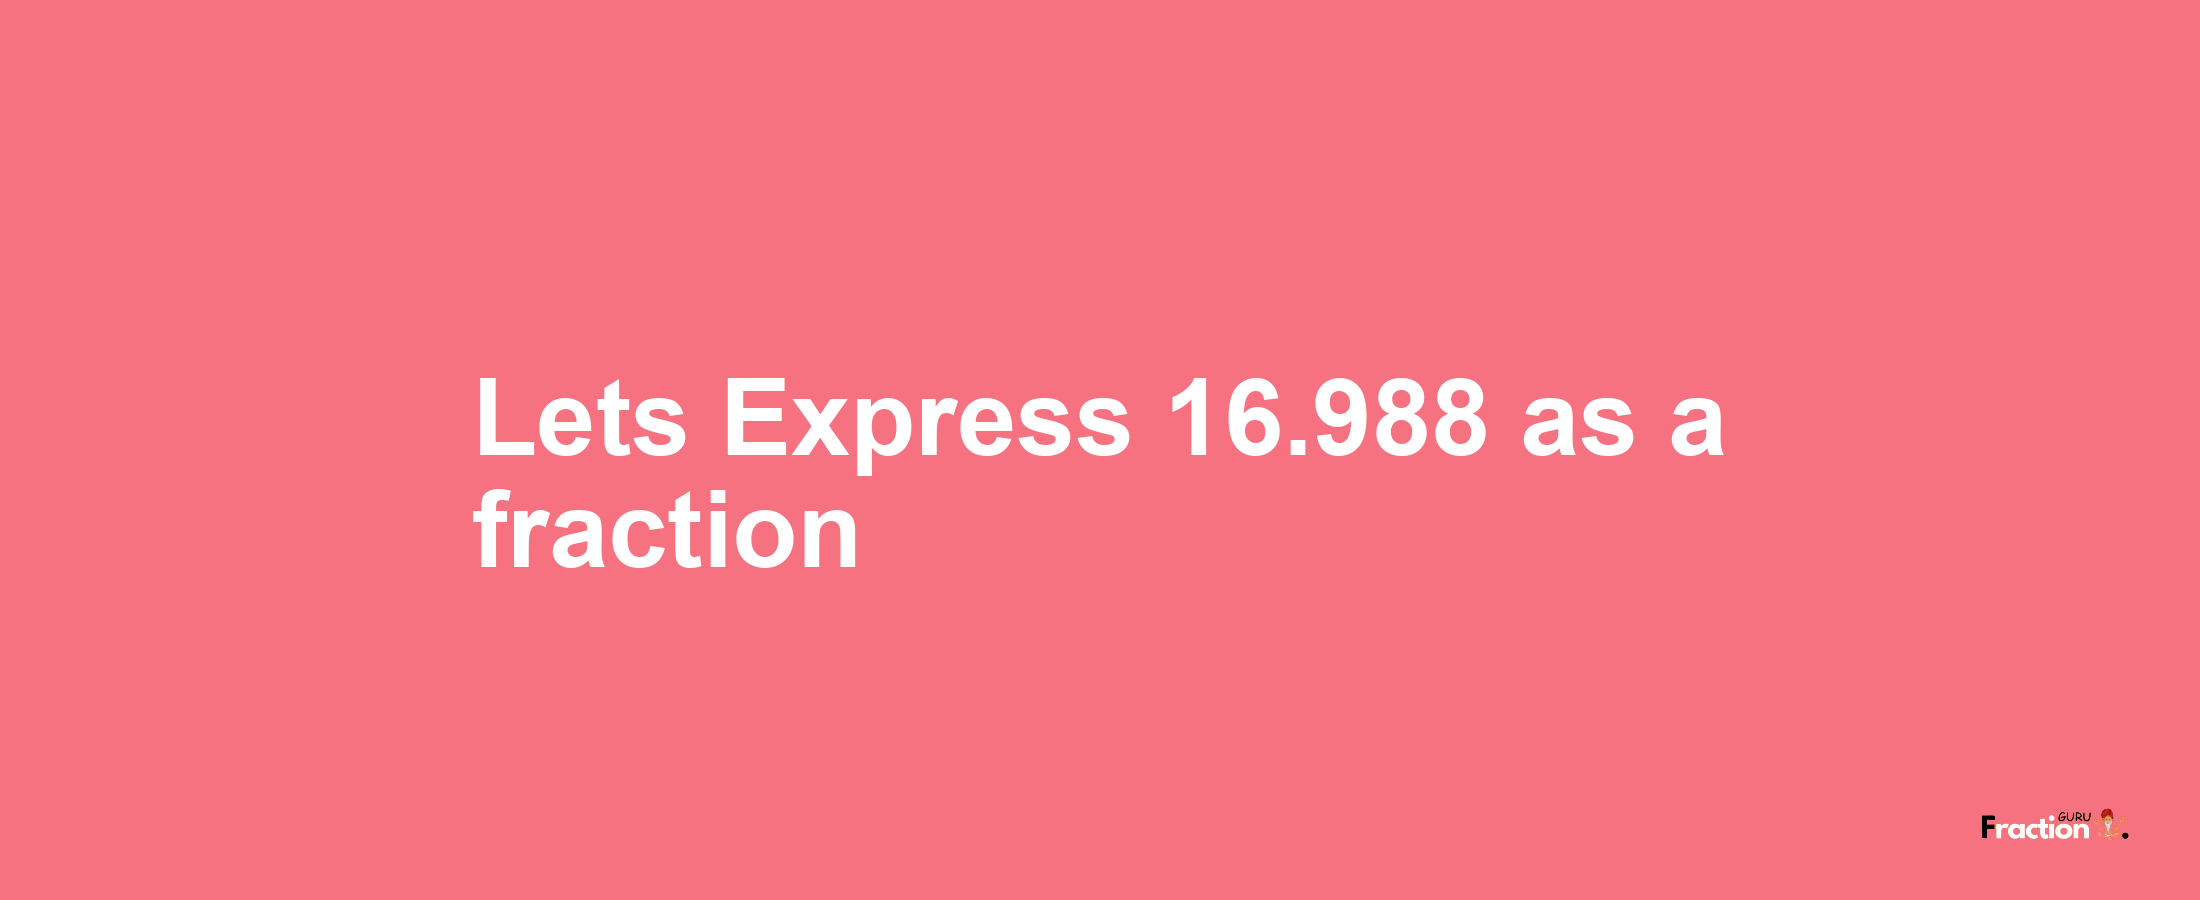 Lets Express 16.988 as afraction